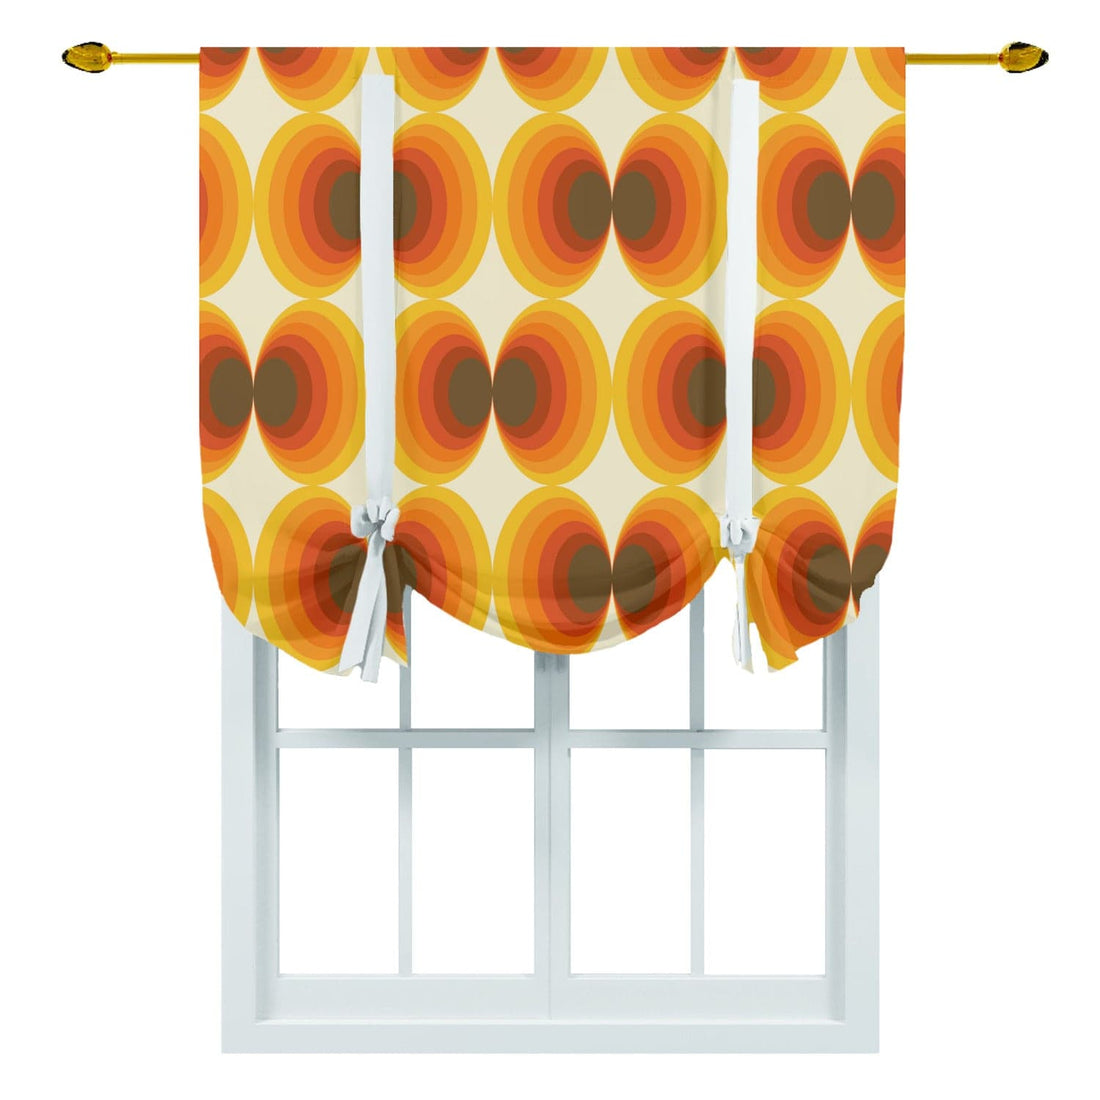 kate-mcenroe-nyc Tie Up Curtain in 70s Mid Mod Geometric Abstract Retro Style Curtains 55858